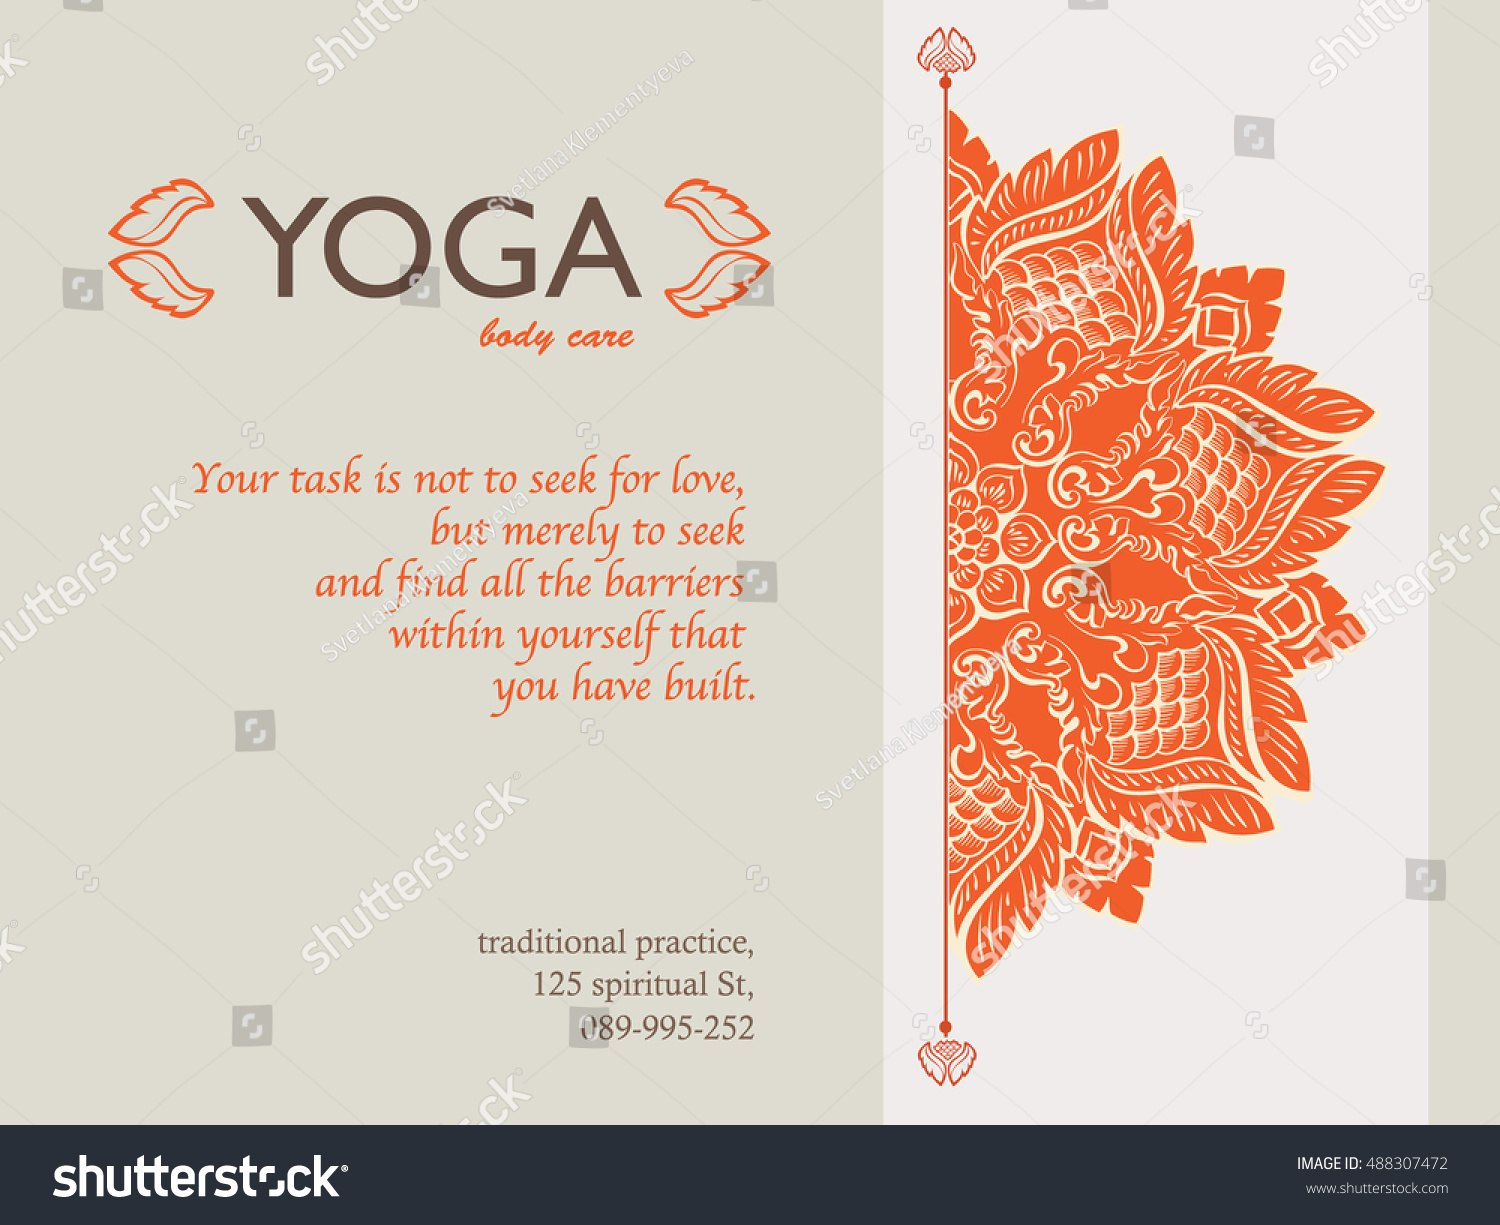 Yoga Gift Certificate Templates  Gift Certificate Templates regarding Yoga Gift Certificate Template Free